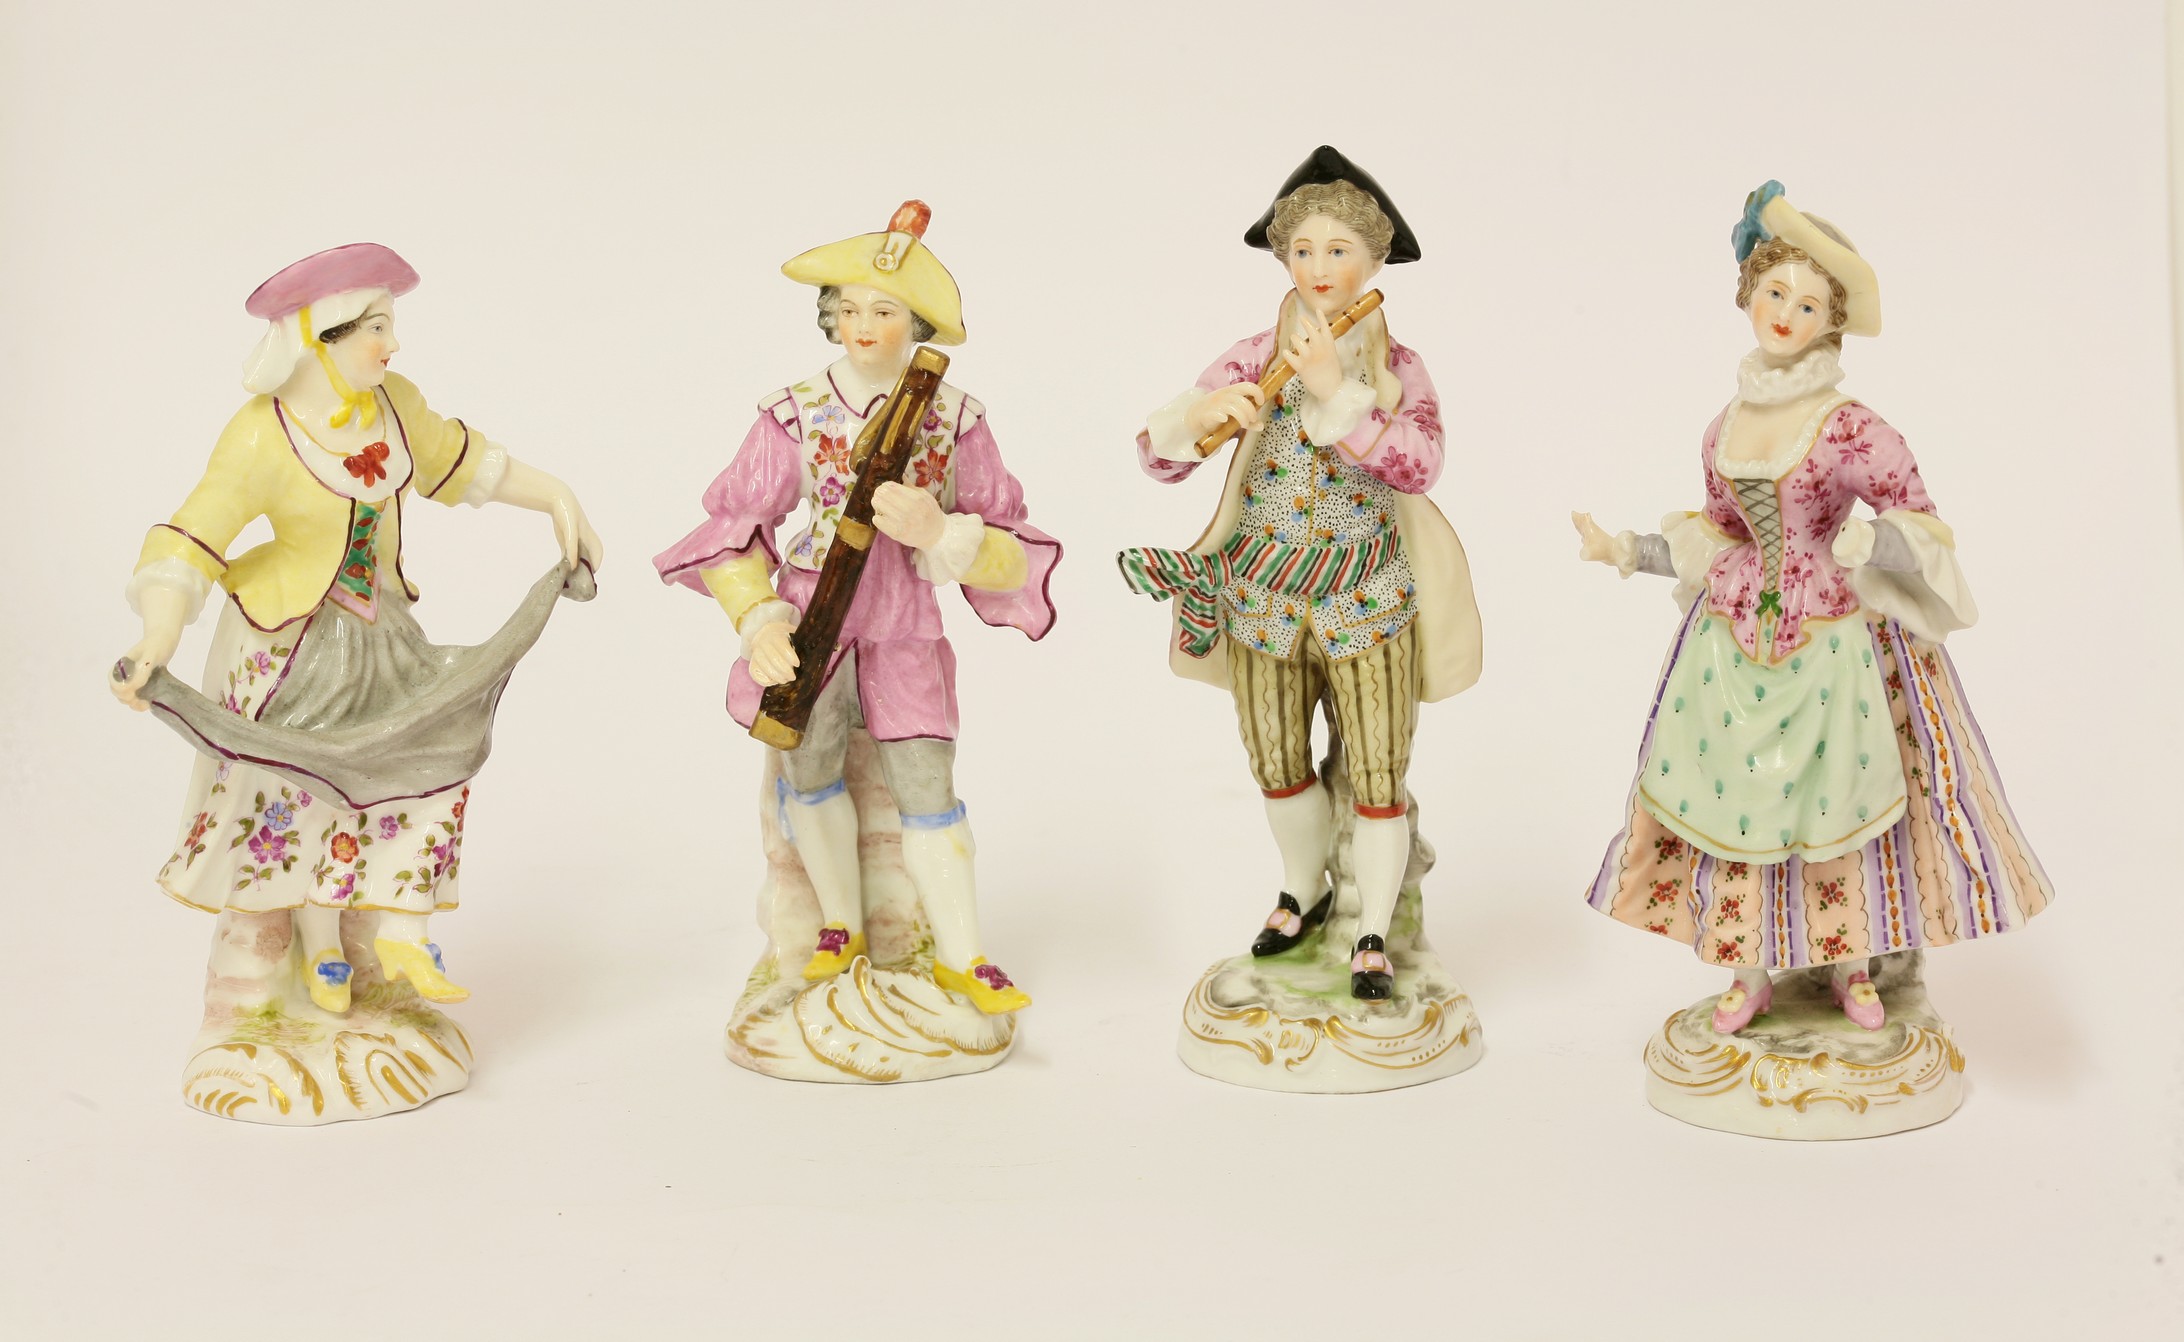 Four Vienna porcelain Figures,
third quarter of the 19th century, forming a dance, two boys